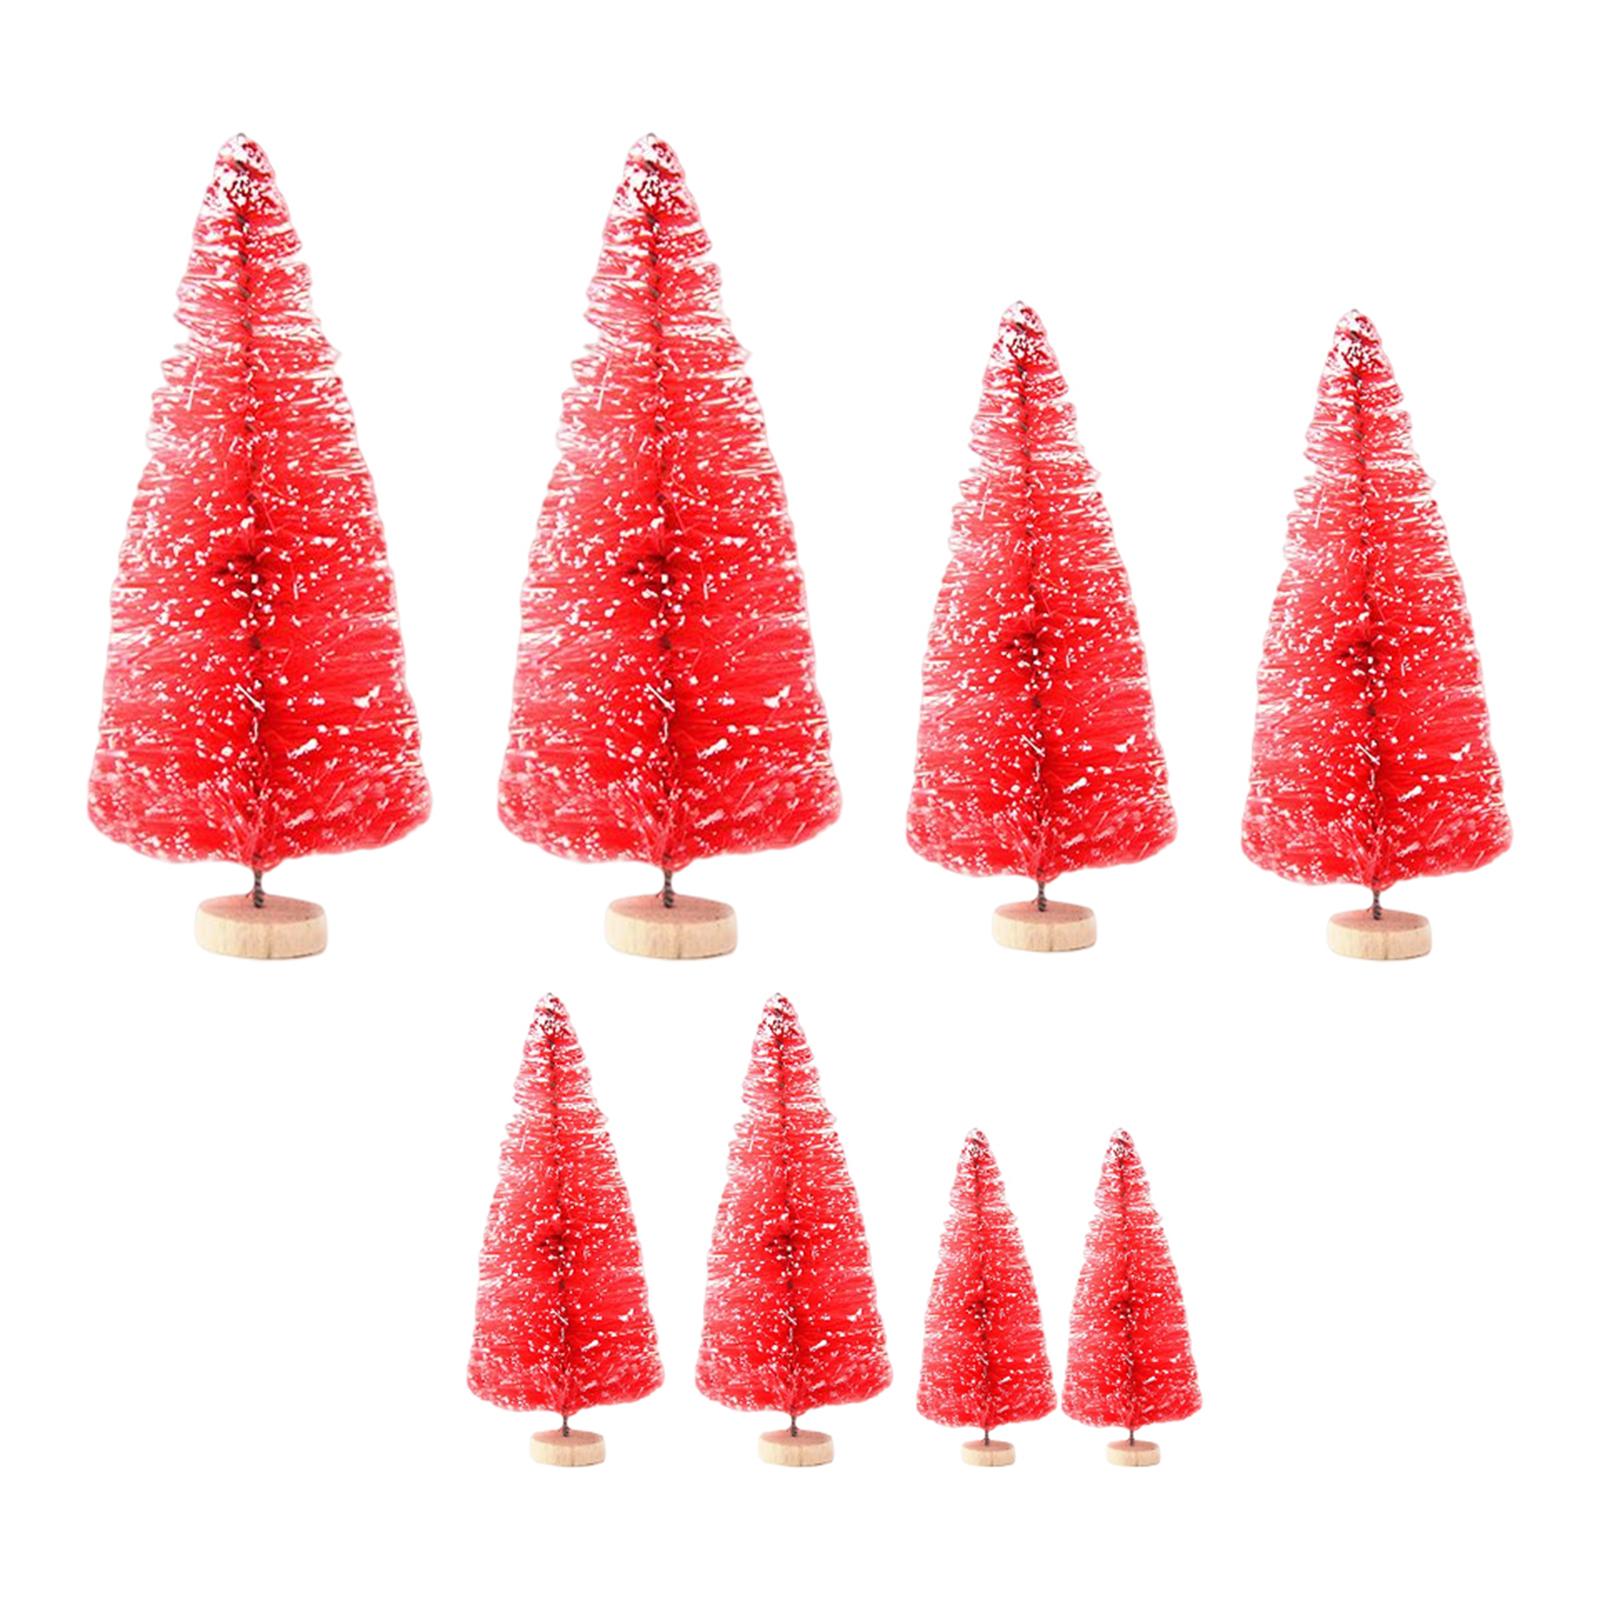 8x Desktop Miniature Pine Tree Ornaments for Desk Christmas Party Holiday Red